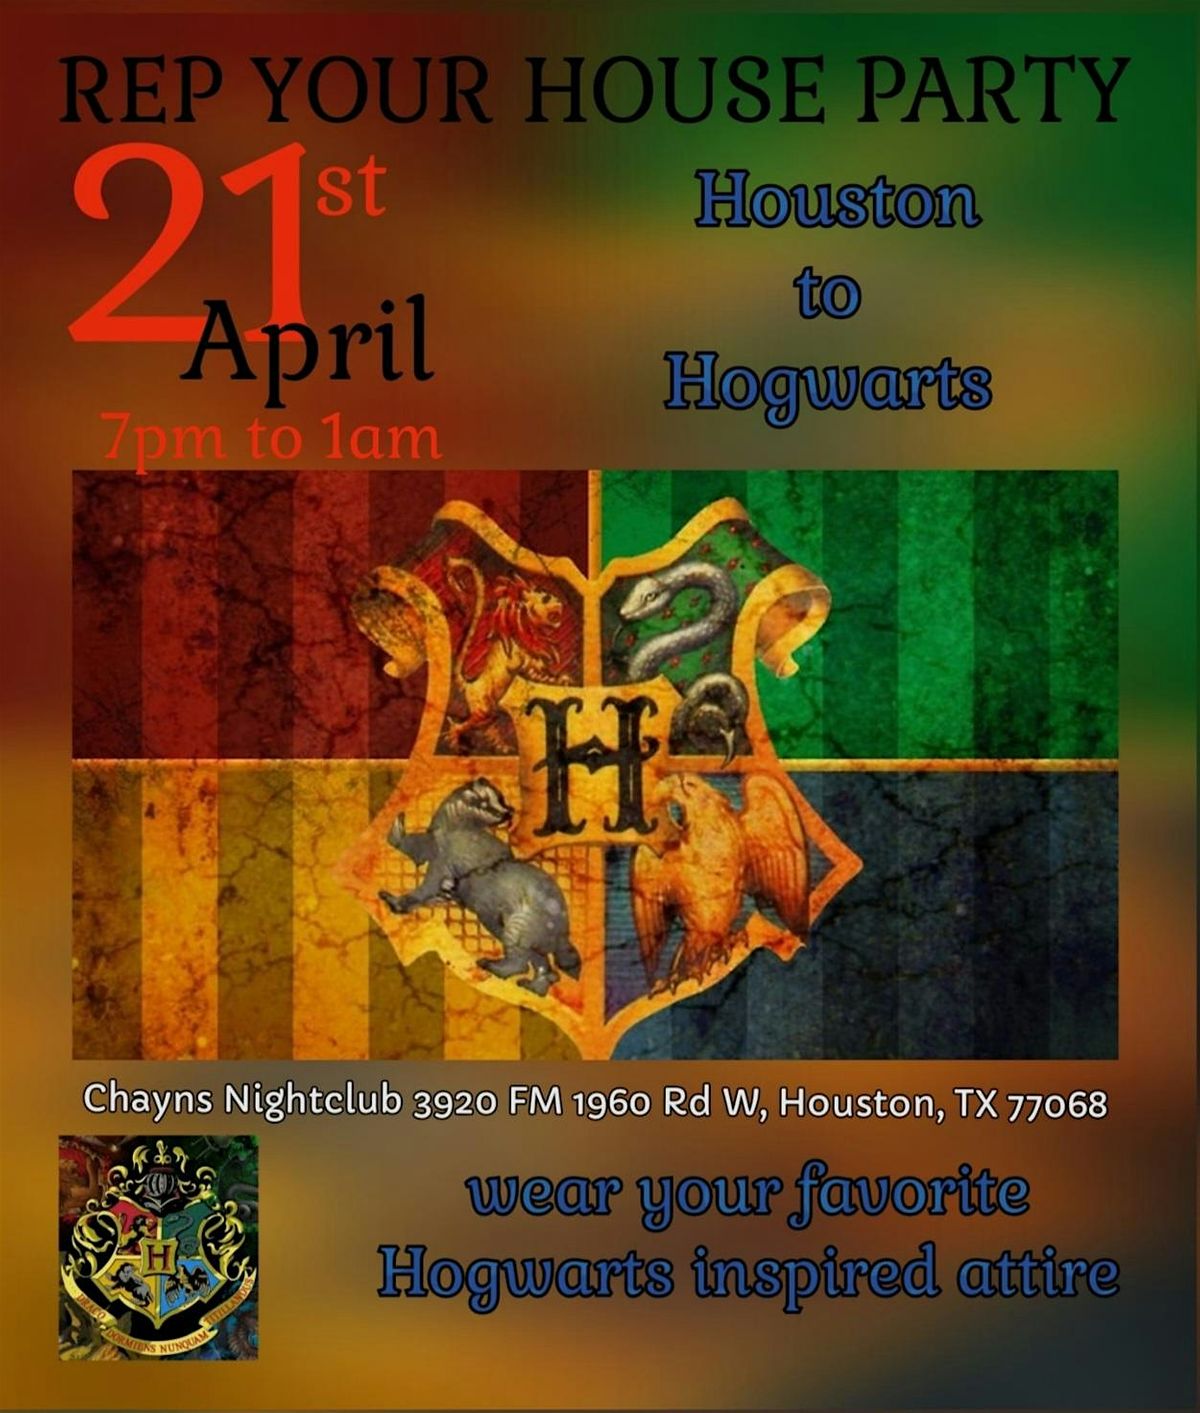 Rep Your House Party: A Hogwarts Themed Event